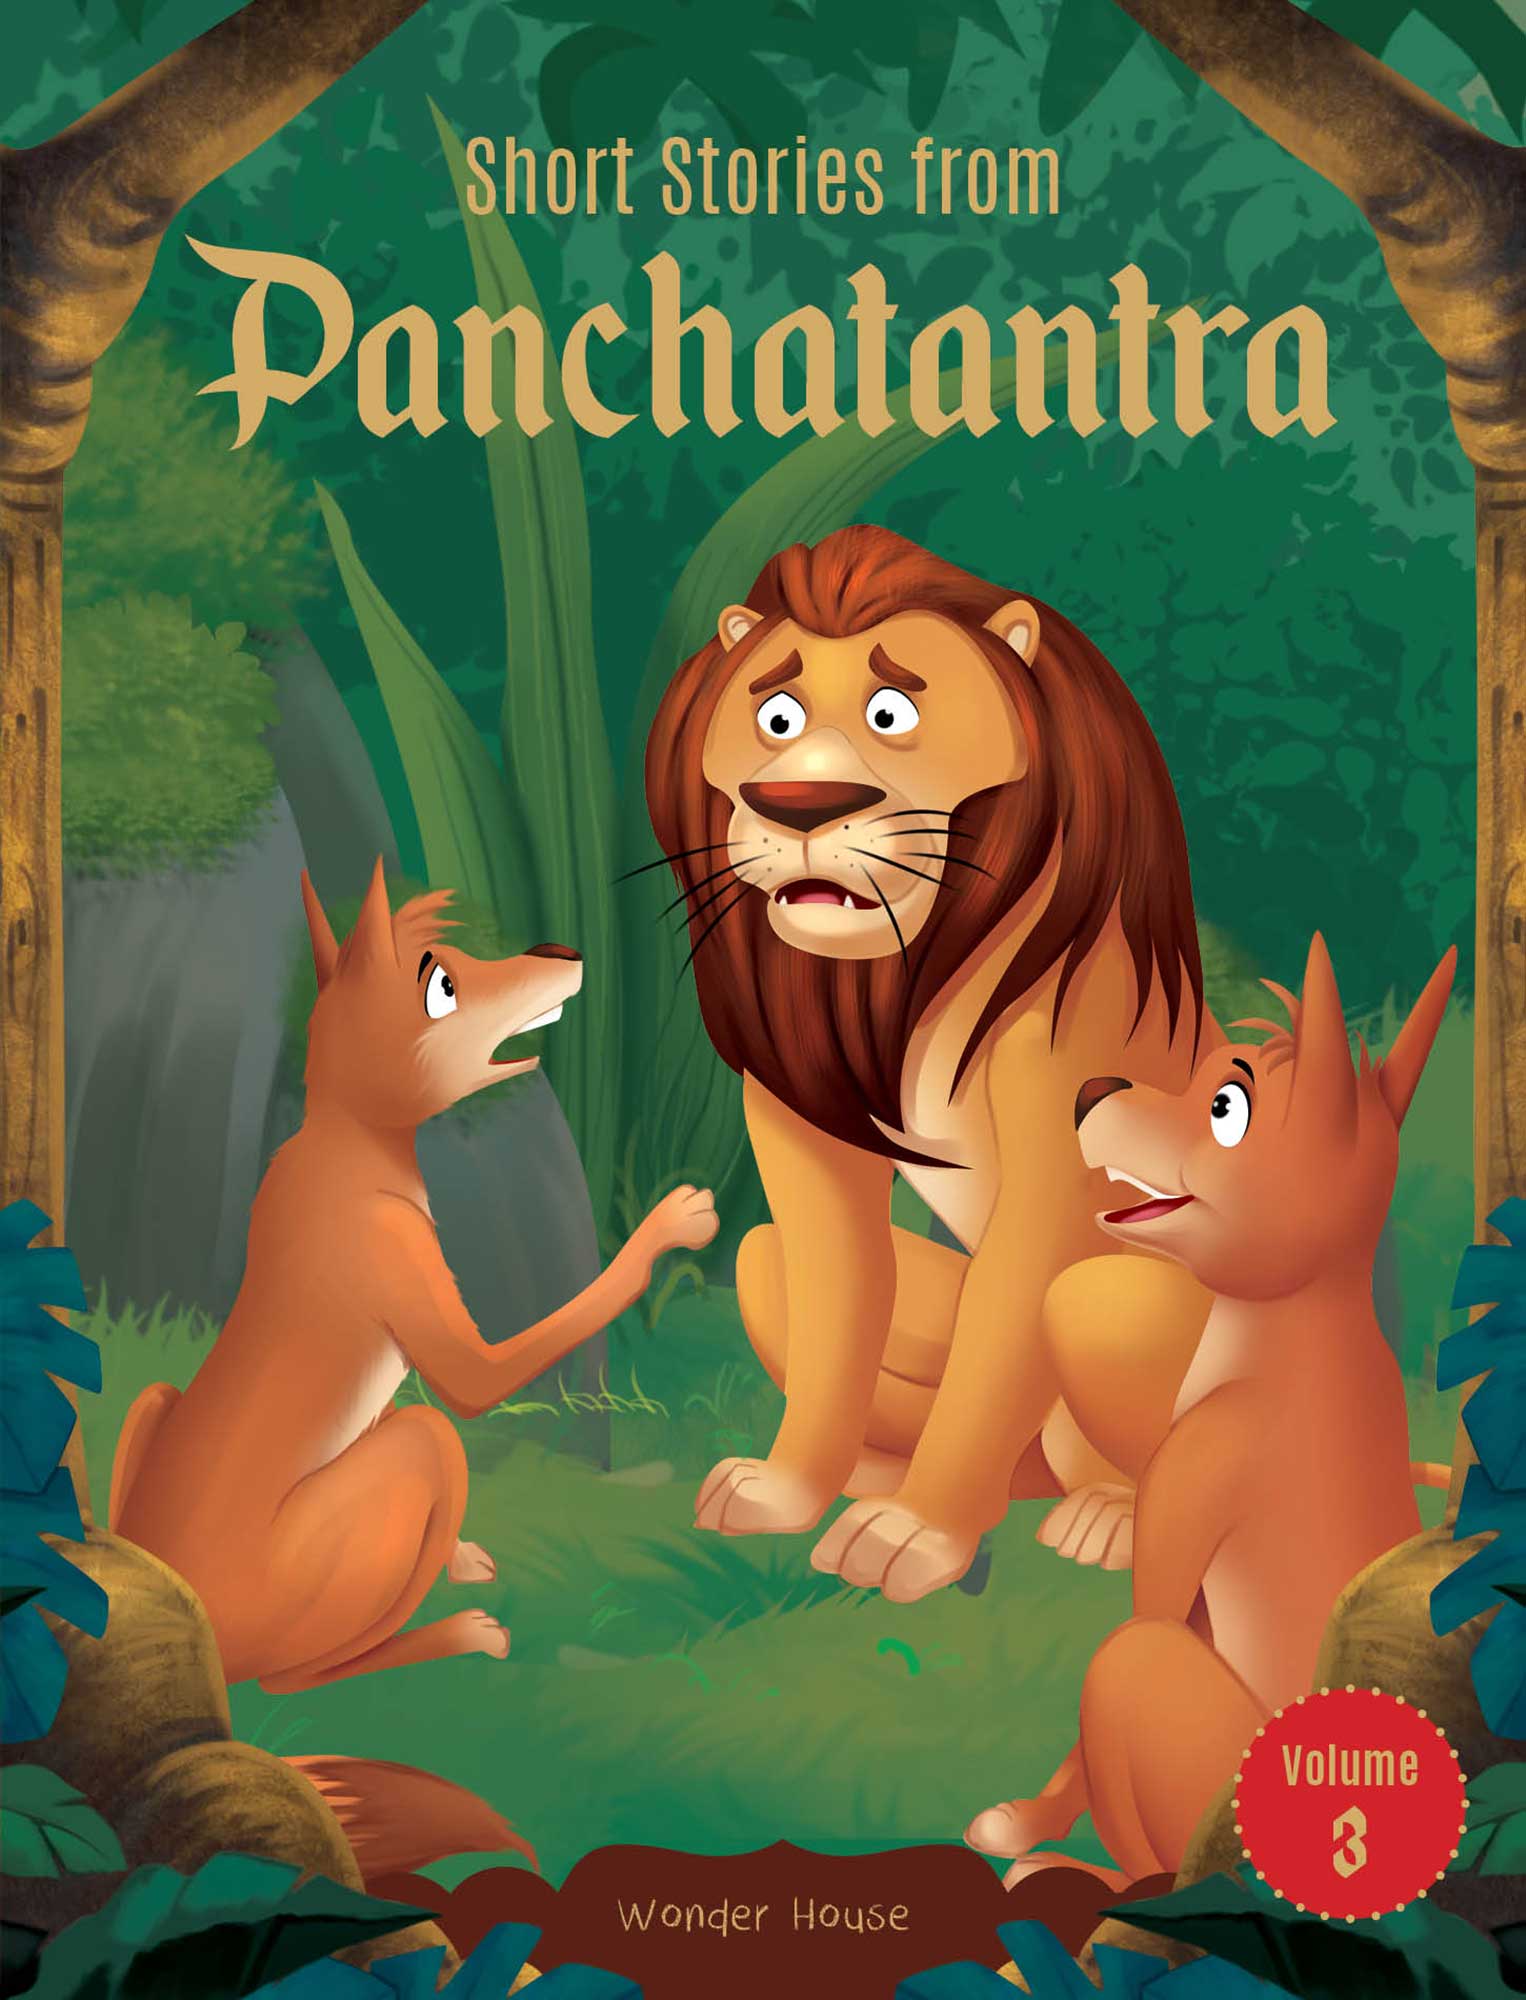 Short Stories From Panchatantra - Volume 3: Abridged Illustrated Stories For Children (With Morals)